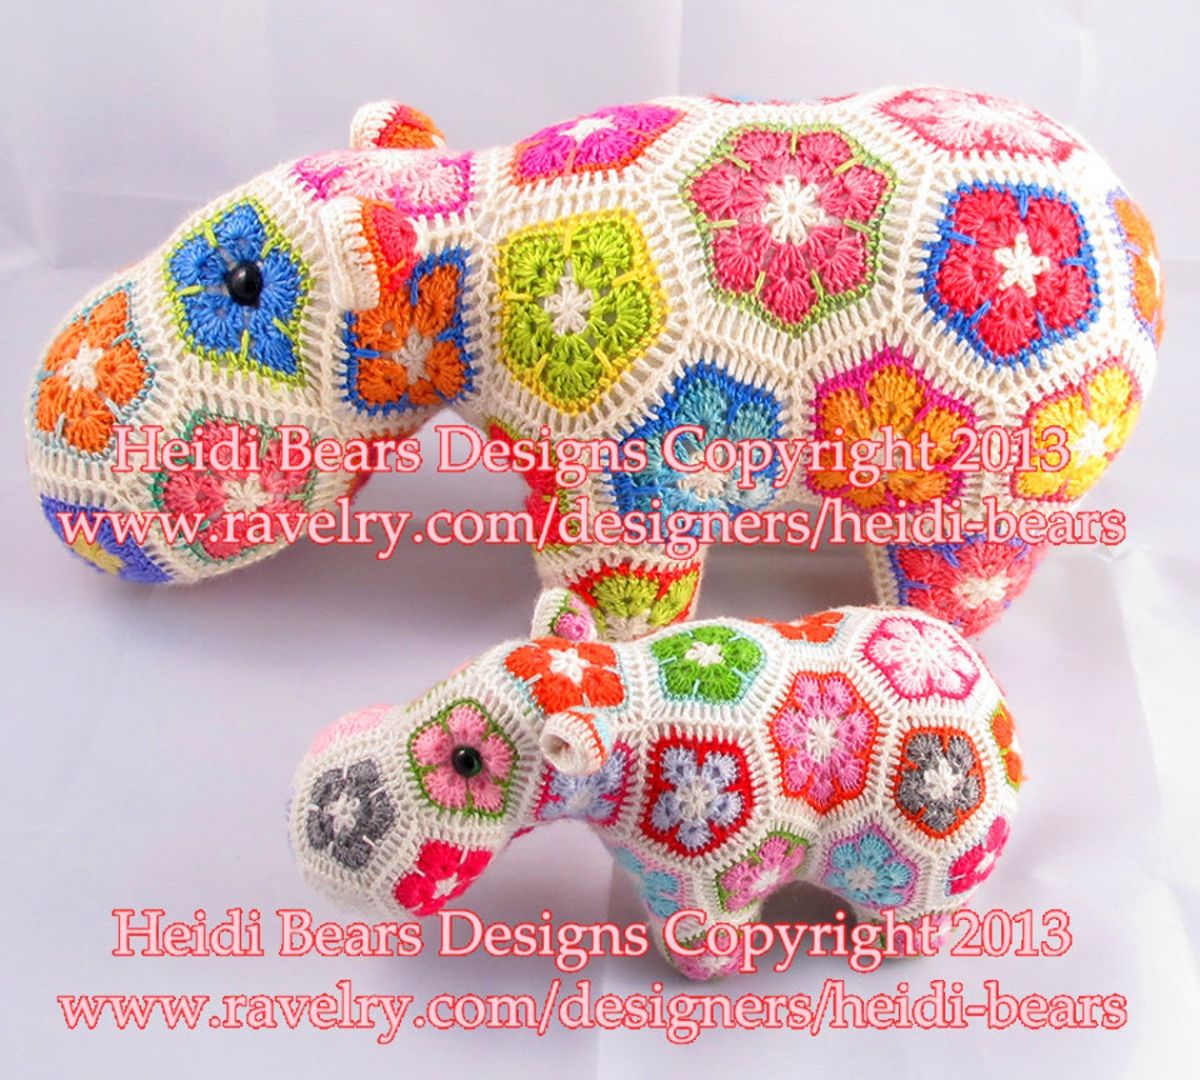 A large cream hippopotamus with yellow, pink, blue, and green crochet African flowers all over it and a smaller one in front in the same design.